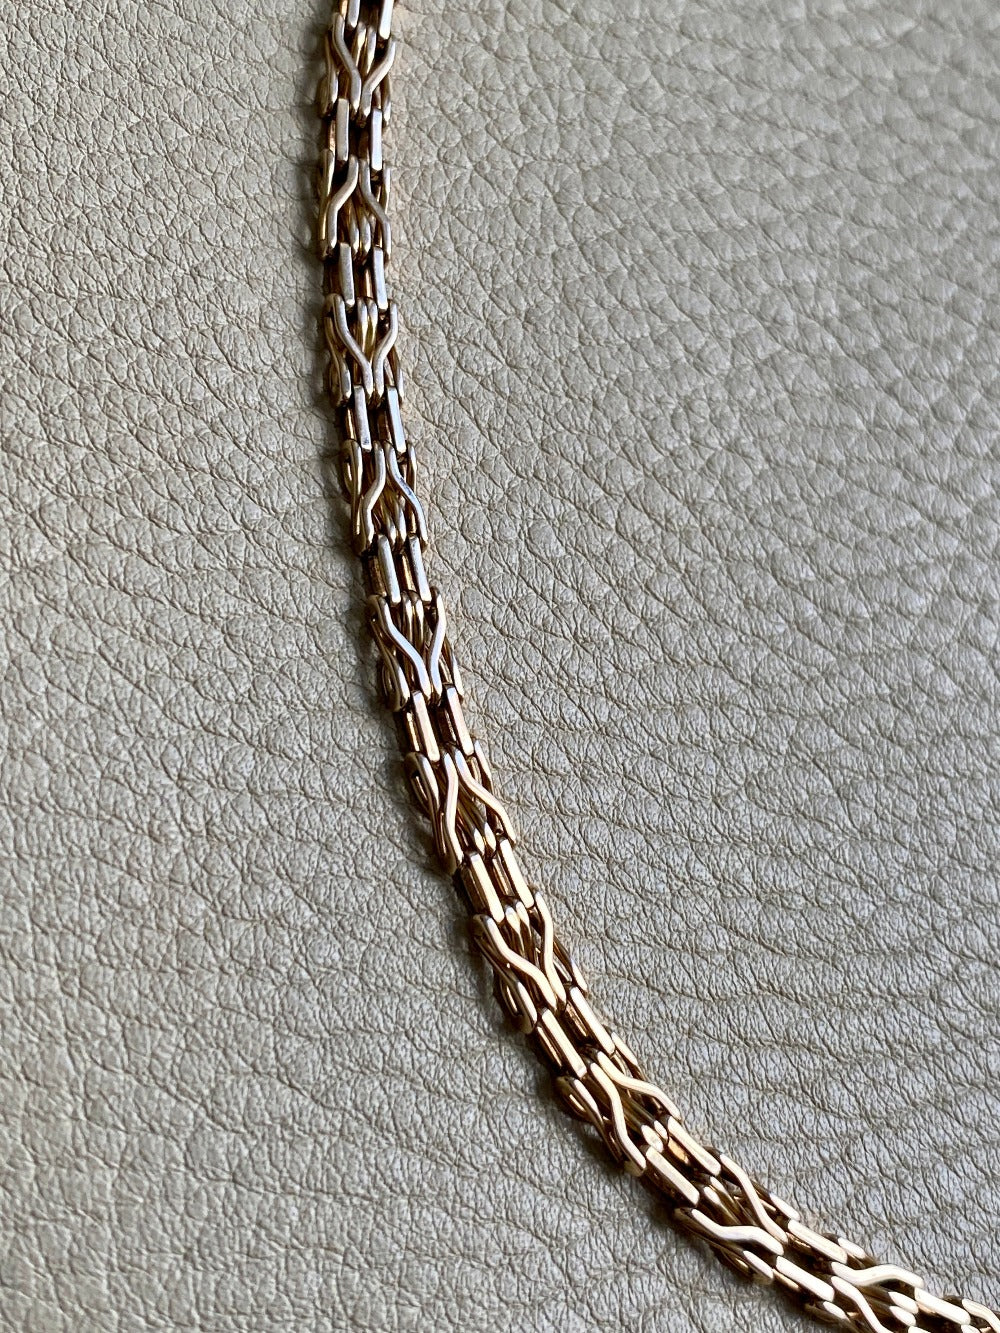 Rare and Exceptional! 14k Danish Gold link necklace - 18.5 inch length